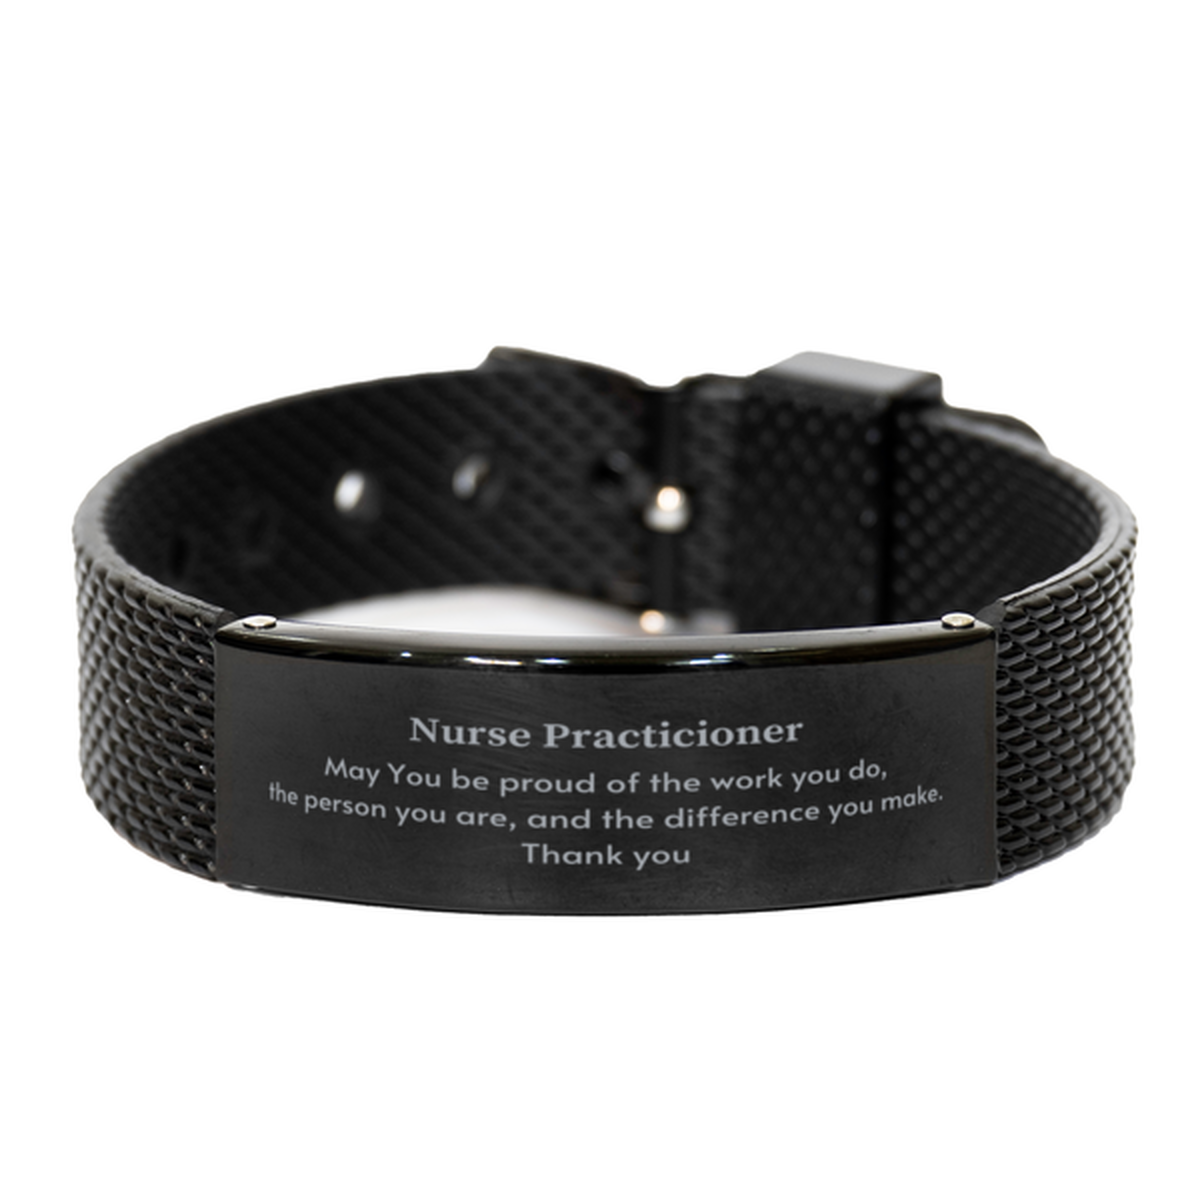 Heartwarming Black Shark Mesh Bracelet Retirement Coworkers Gifts for Nurse Practicioner, Nurse Practicioner May You be proud of the work you do, the person you are Gifts for Boss Men Women Friends